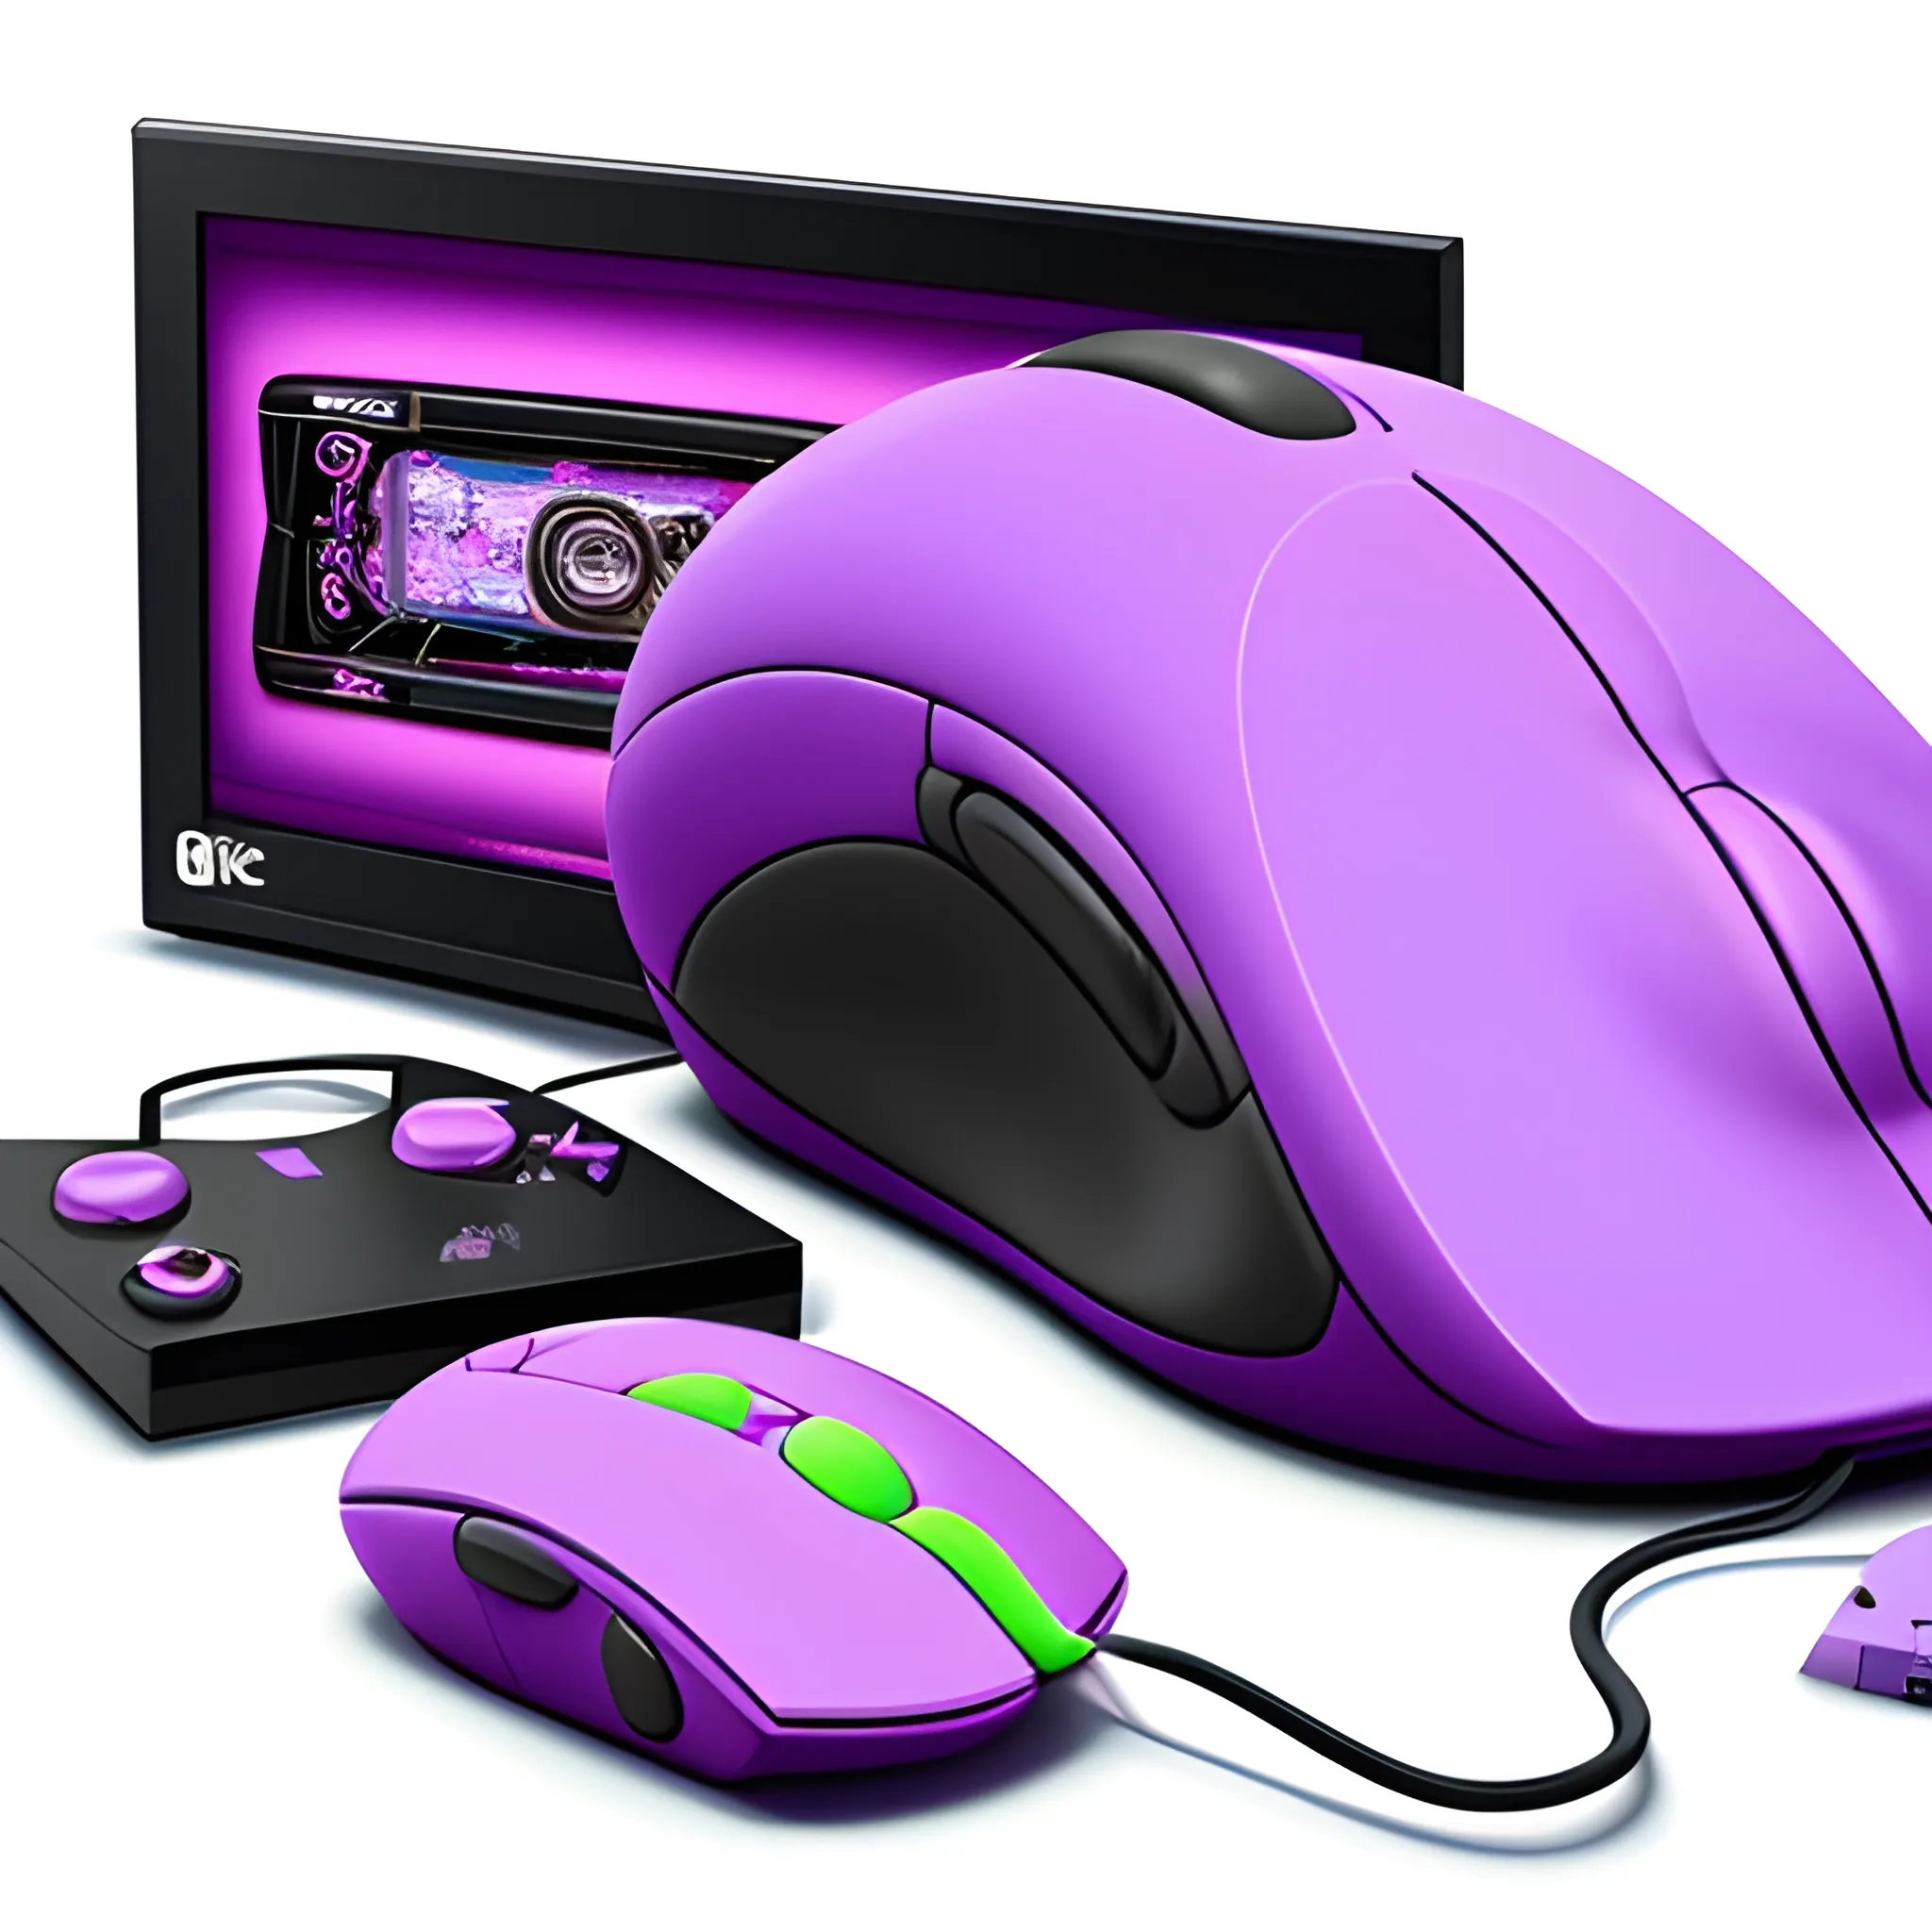 The purple mouse is playing on the game console, Trippy